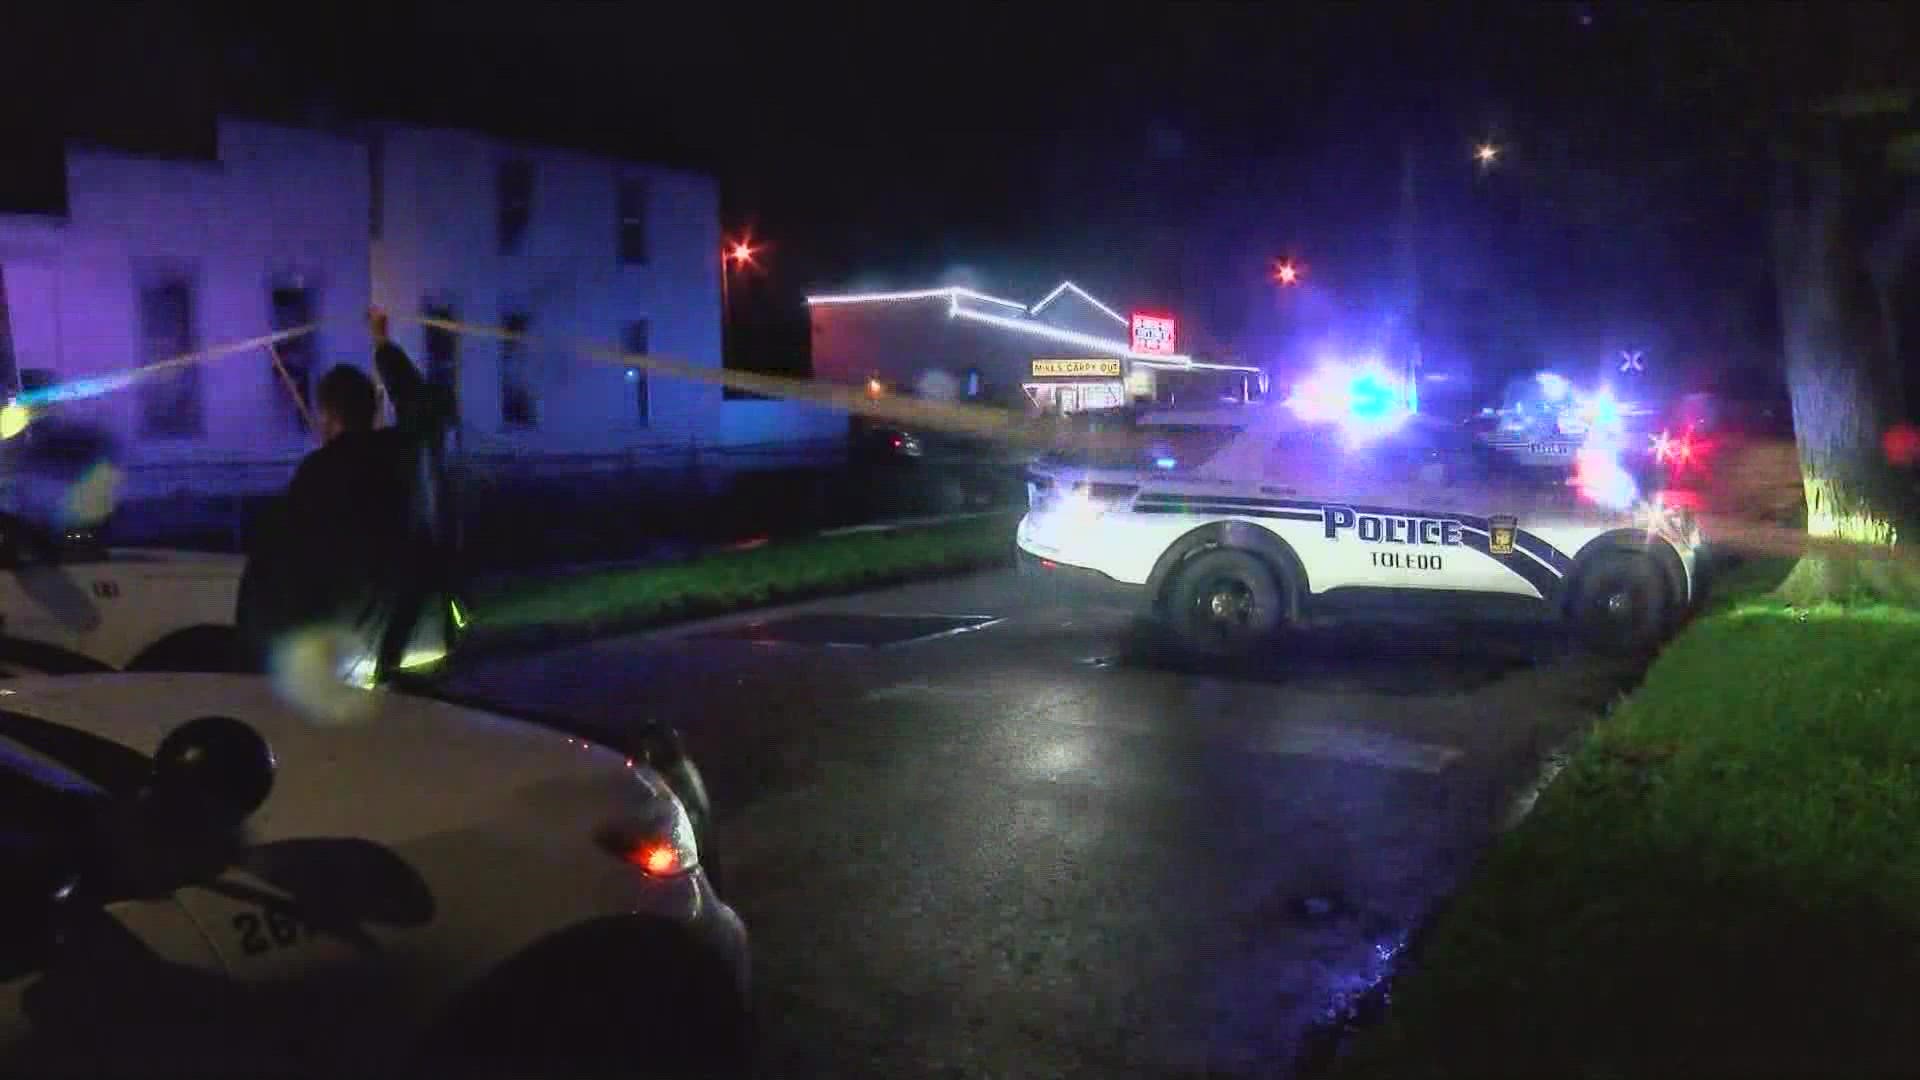 The shooting that happened at North Erie and Cleveland streets around 8 p.m., according to TPD. An 18-year-old man was arrested for murder.